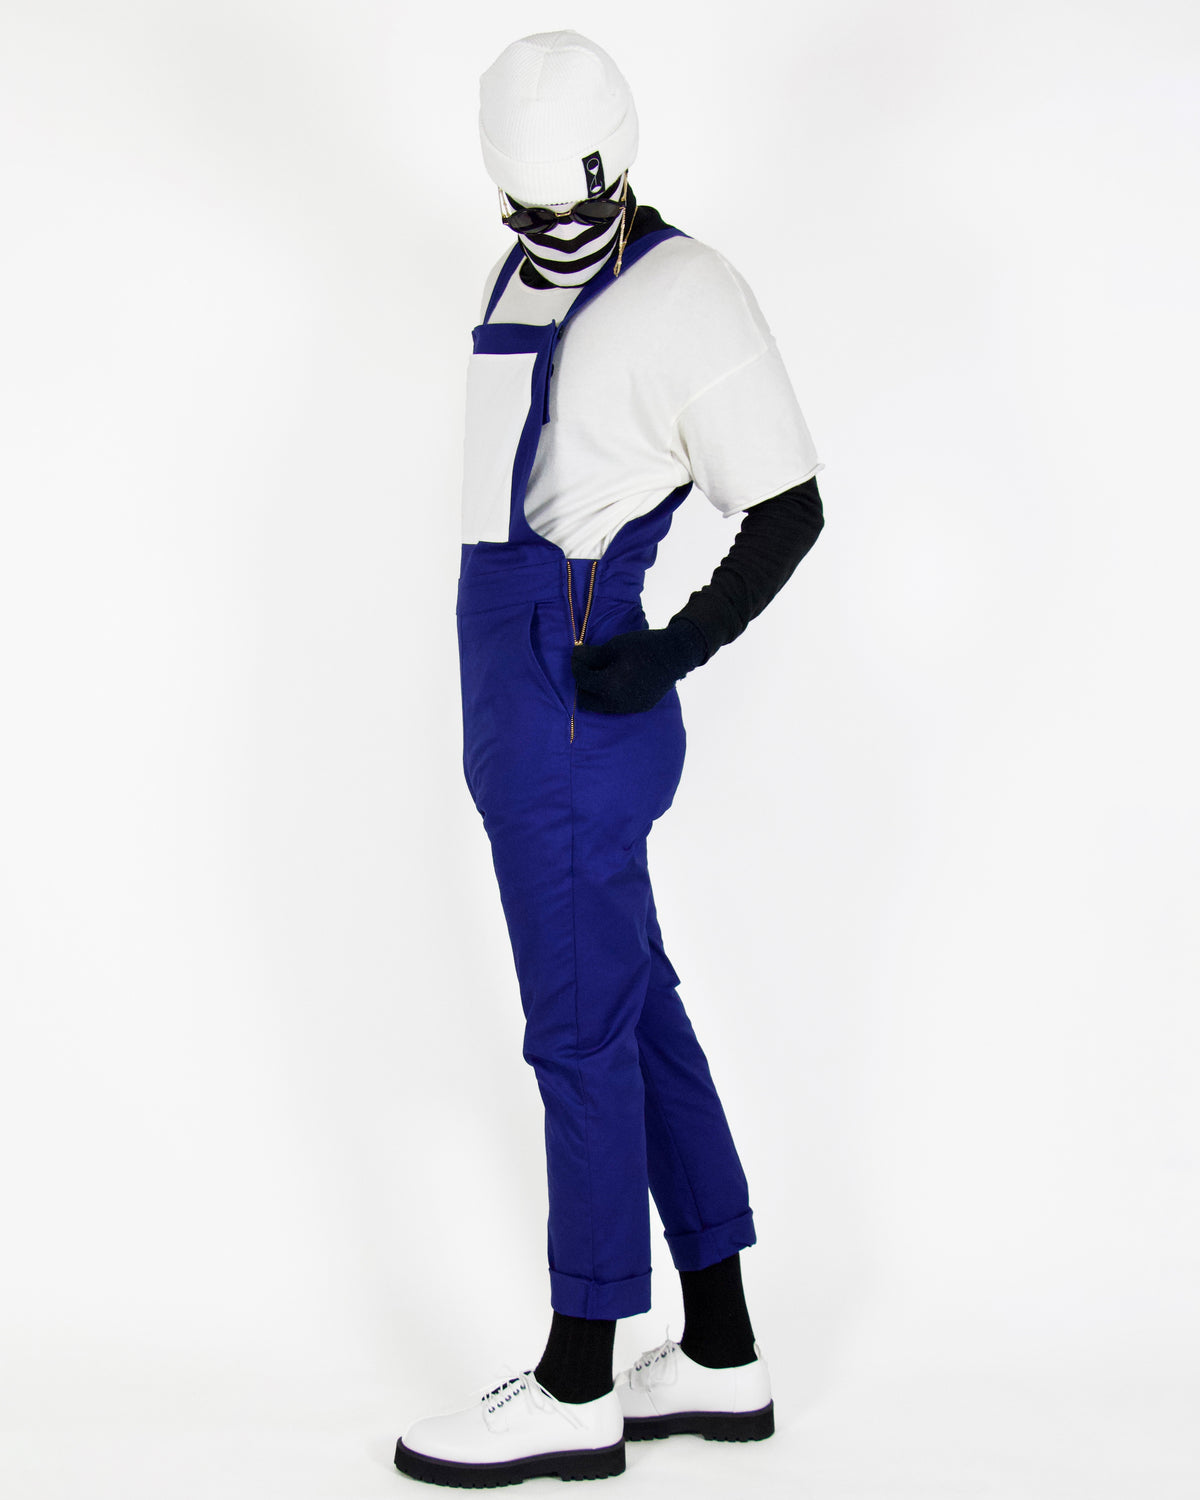 Katee Overalls - Blue